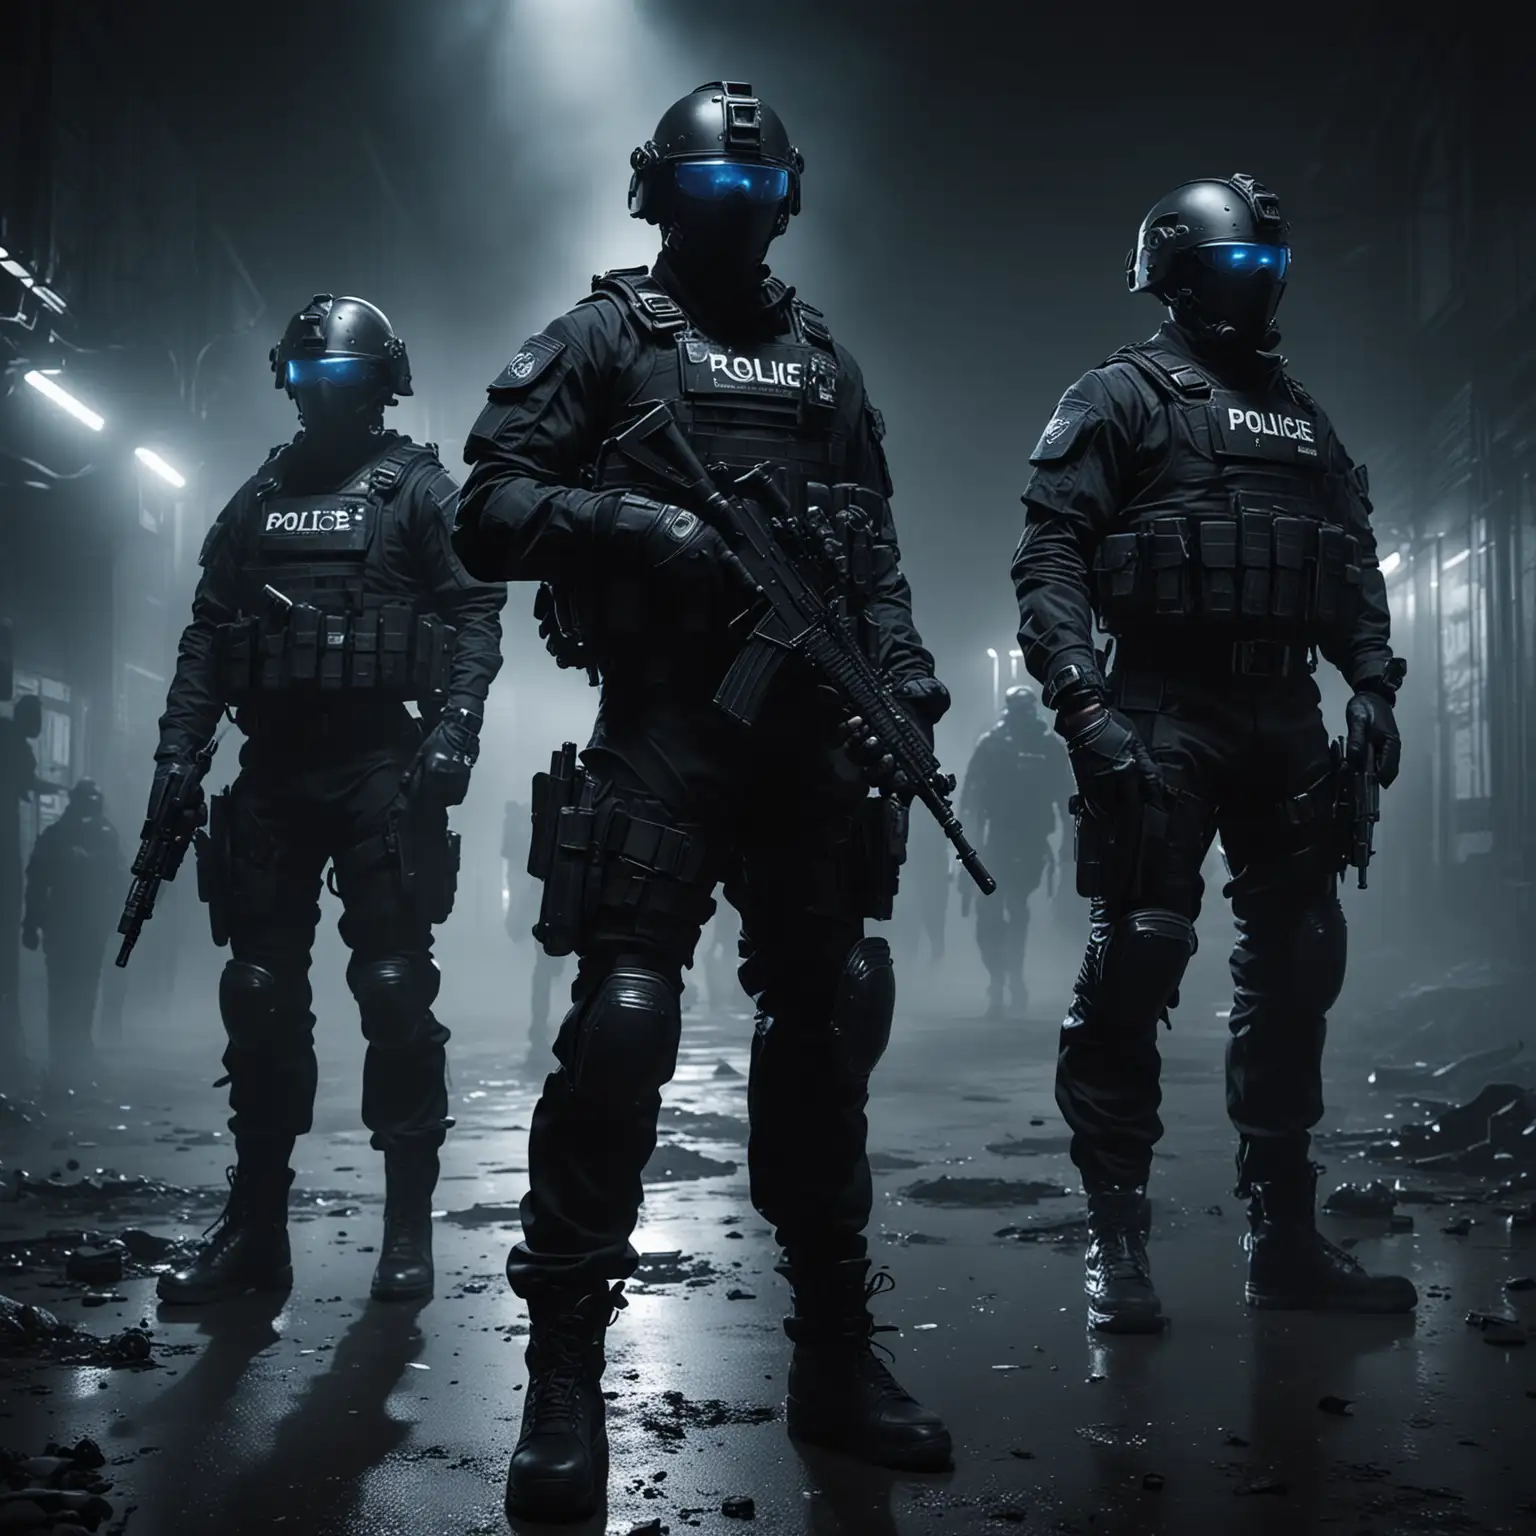 A five-man squad of police officers, futuristic tactical gear, black outfits, at night, dark ambient lighting, realistic